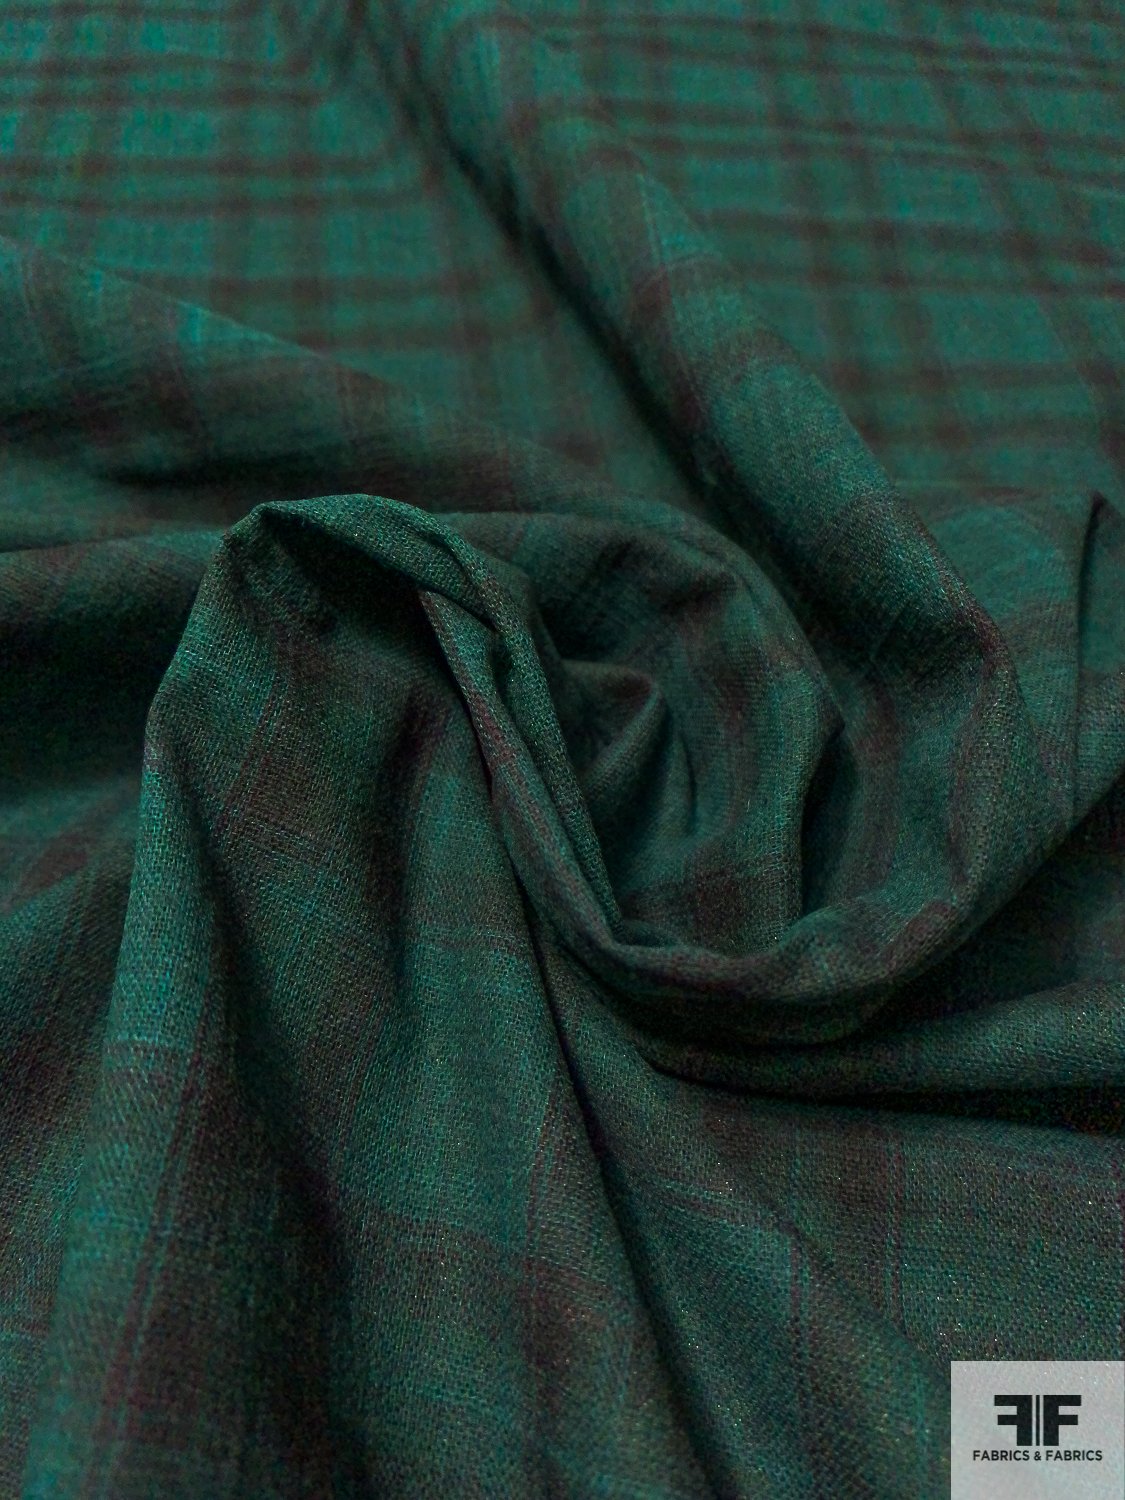 2-Ply Plaid Cotton Linen - Evergreen / Navy / Earth